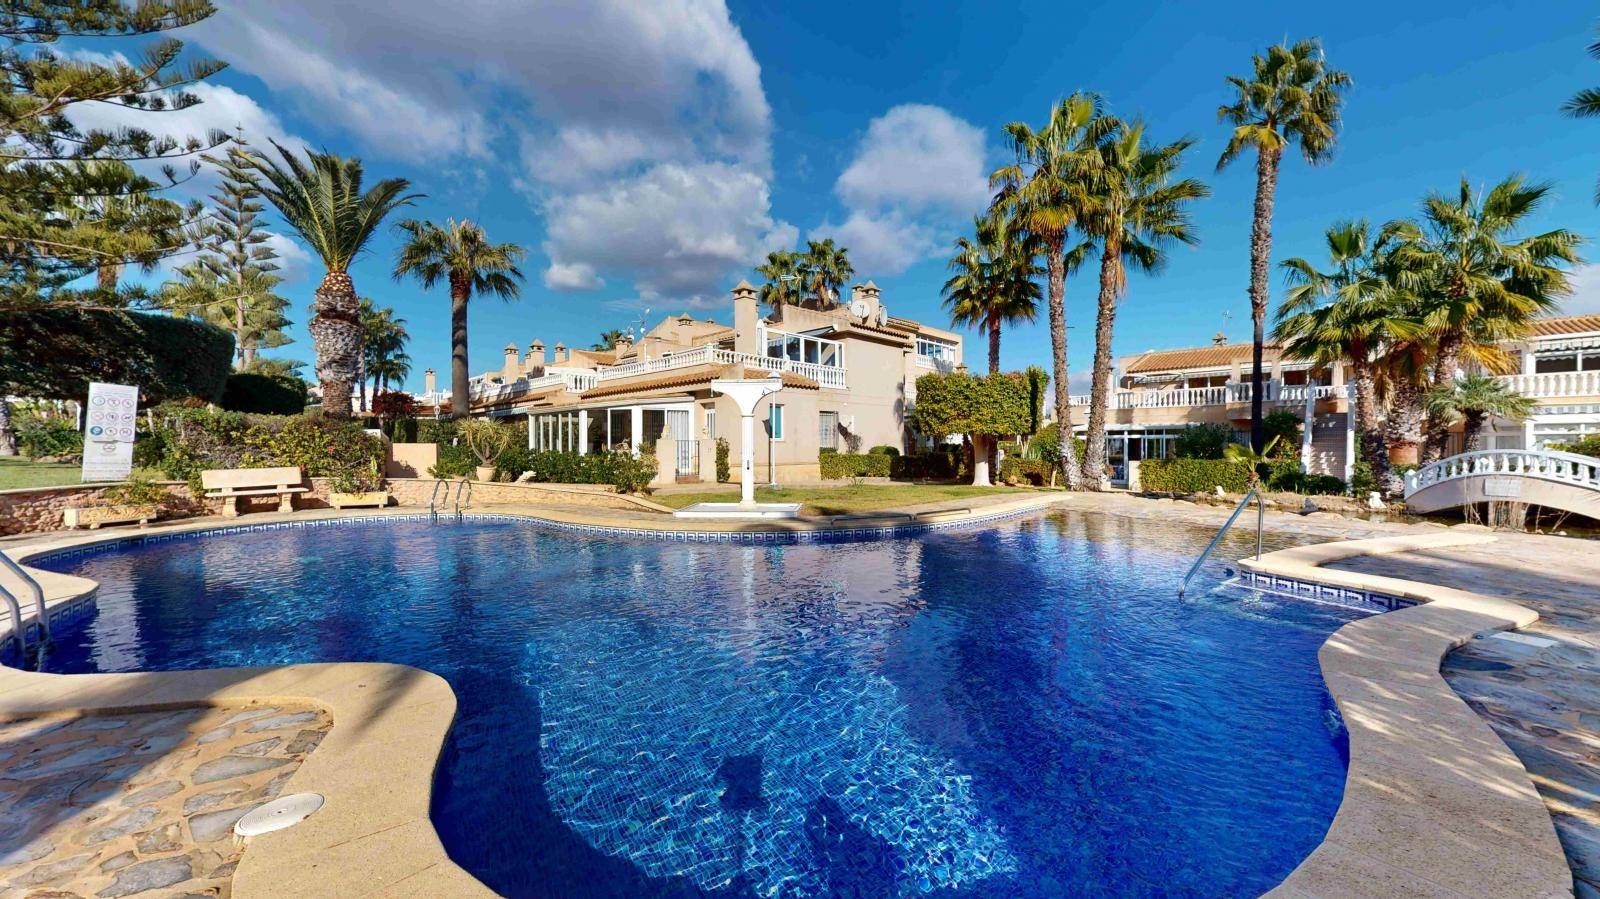 DUPLEX PENTHOUSE BUNGALOW IN PLAYA FLAMENCA WITH PRIVATE PARKING